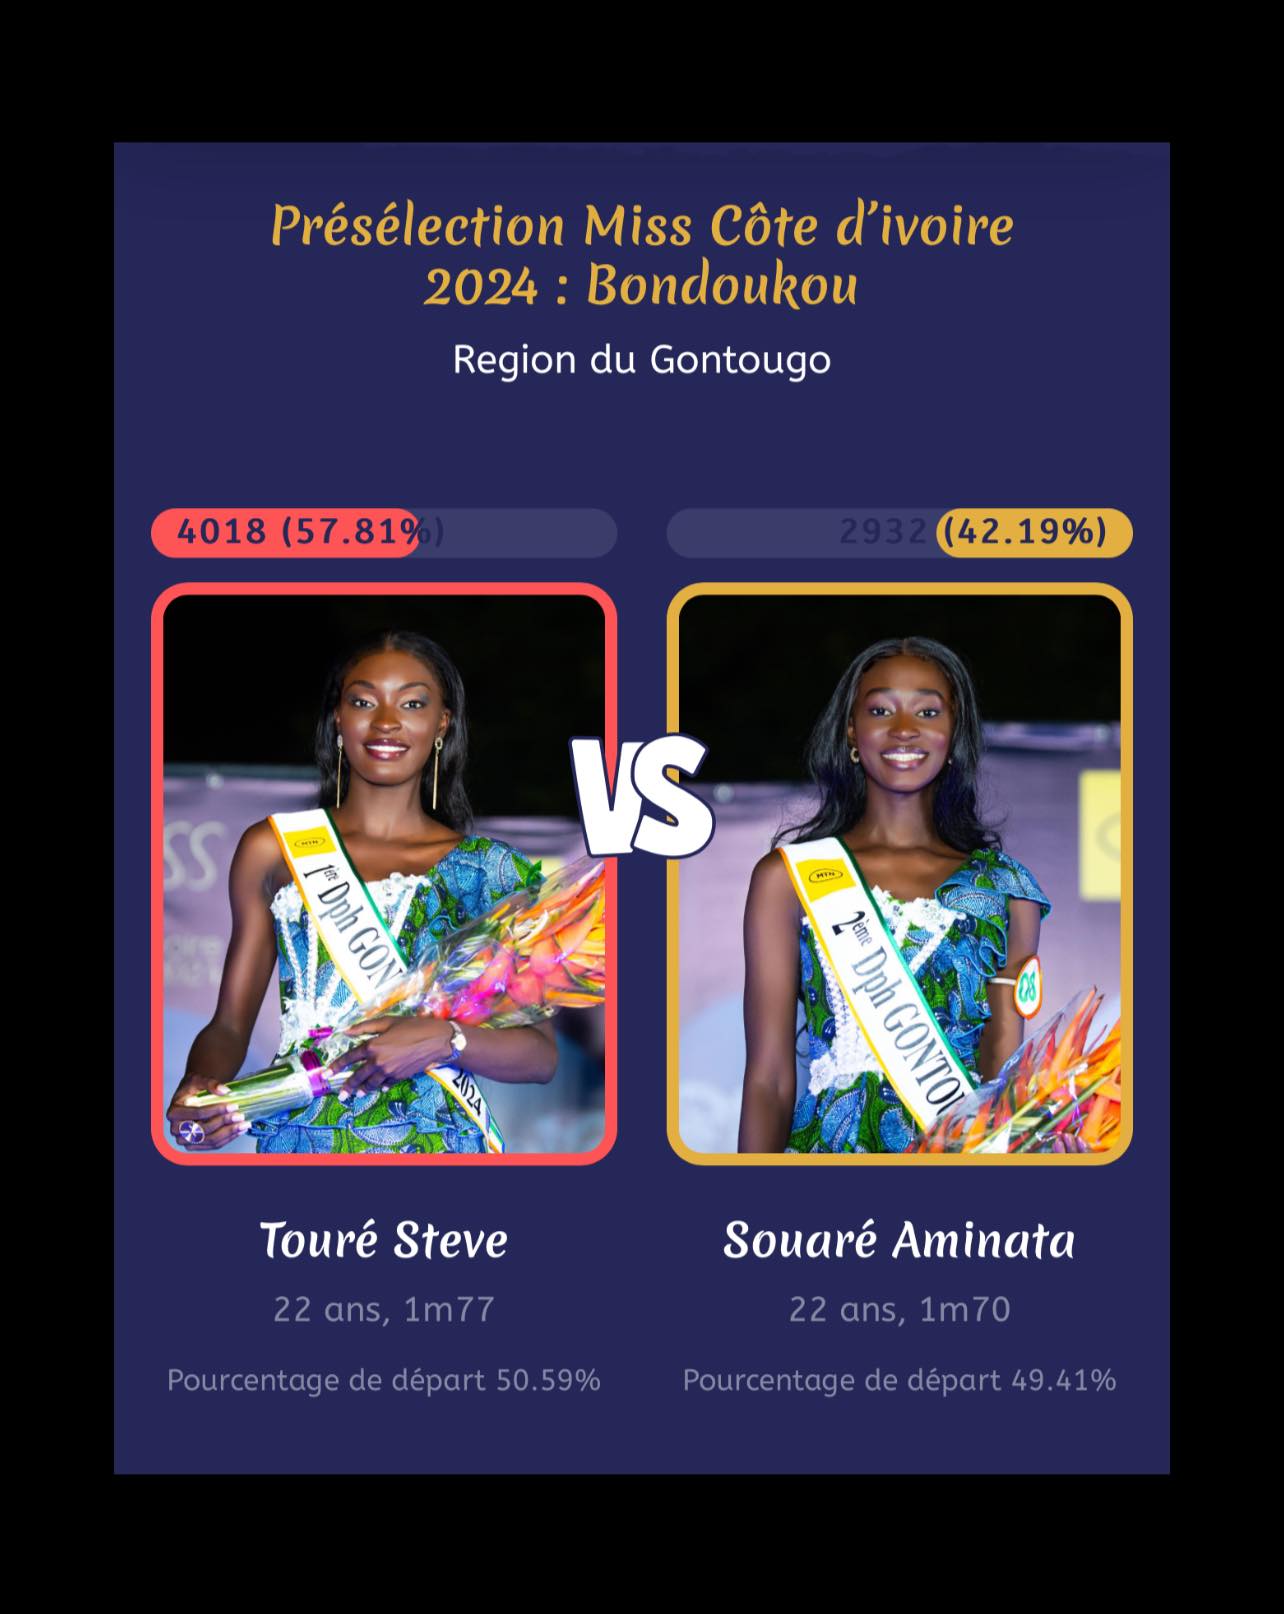 End of BONDOUKOU #faceaface - the result- Touré Steve candidate N°3 , is the 2nd representative of the GONTOUGO region for the National final with a consolidated result of 54.2% including 4018 clicks.